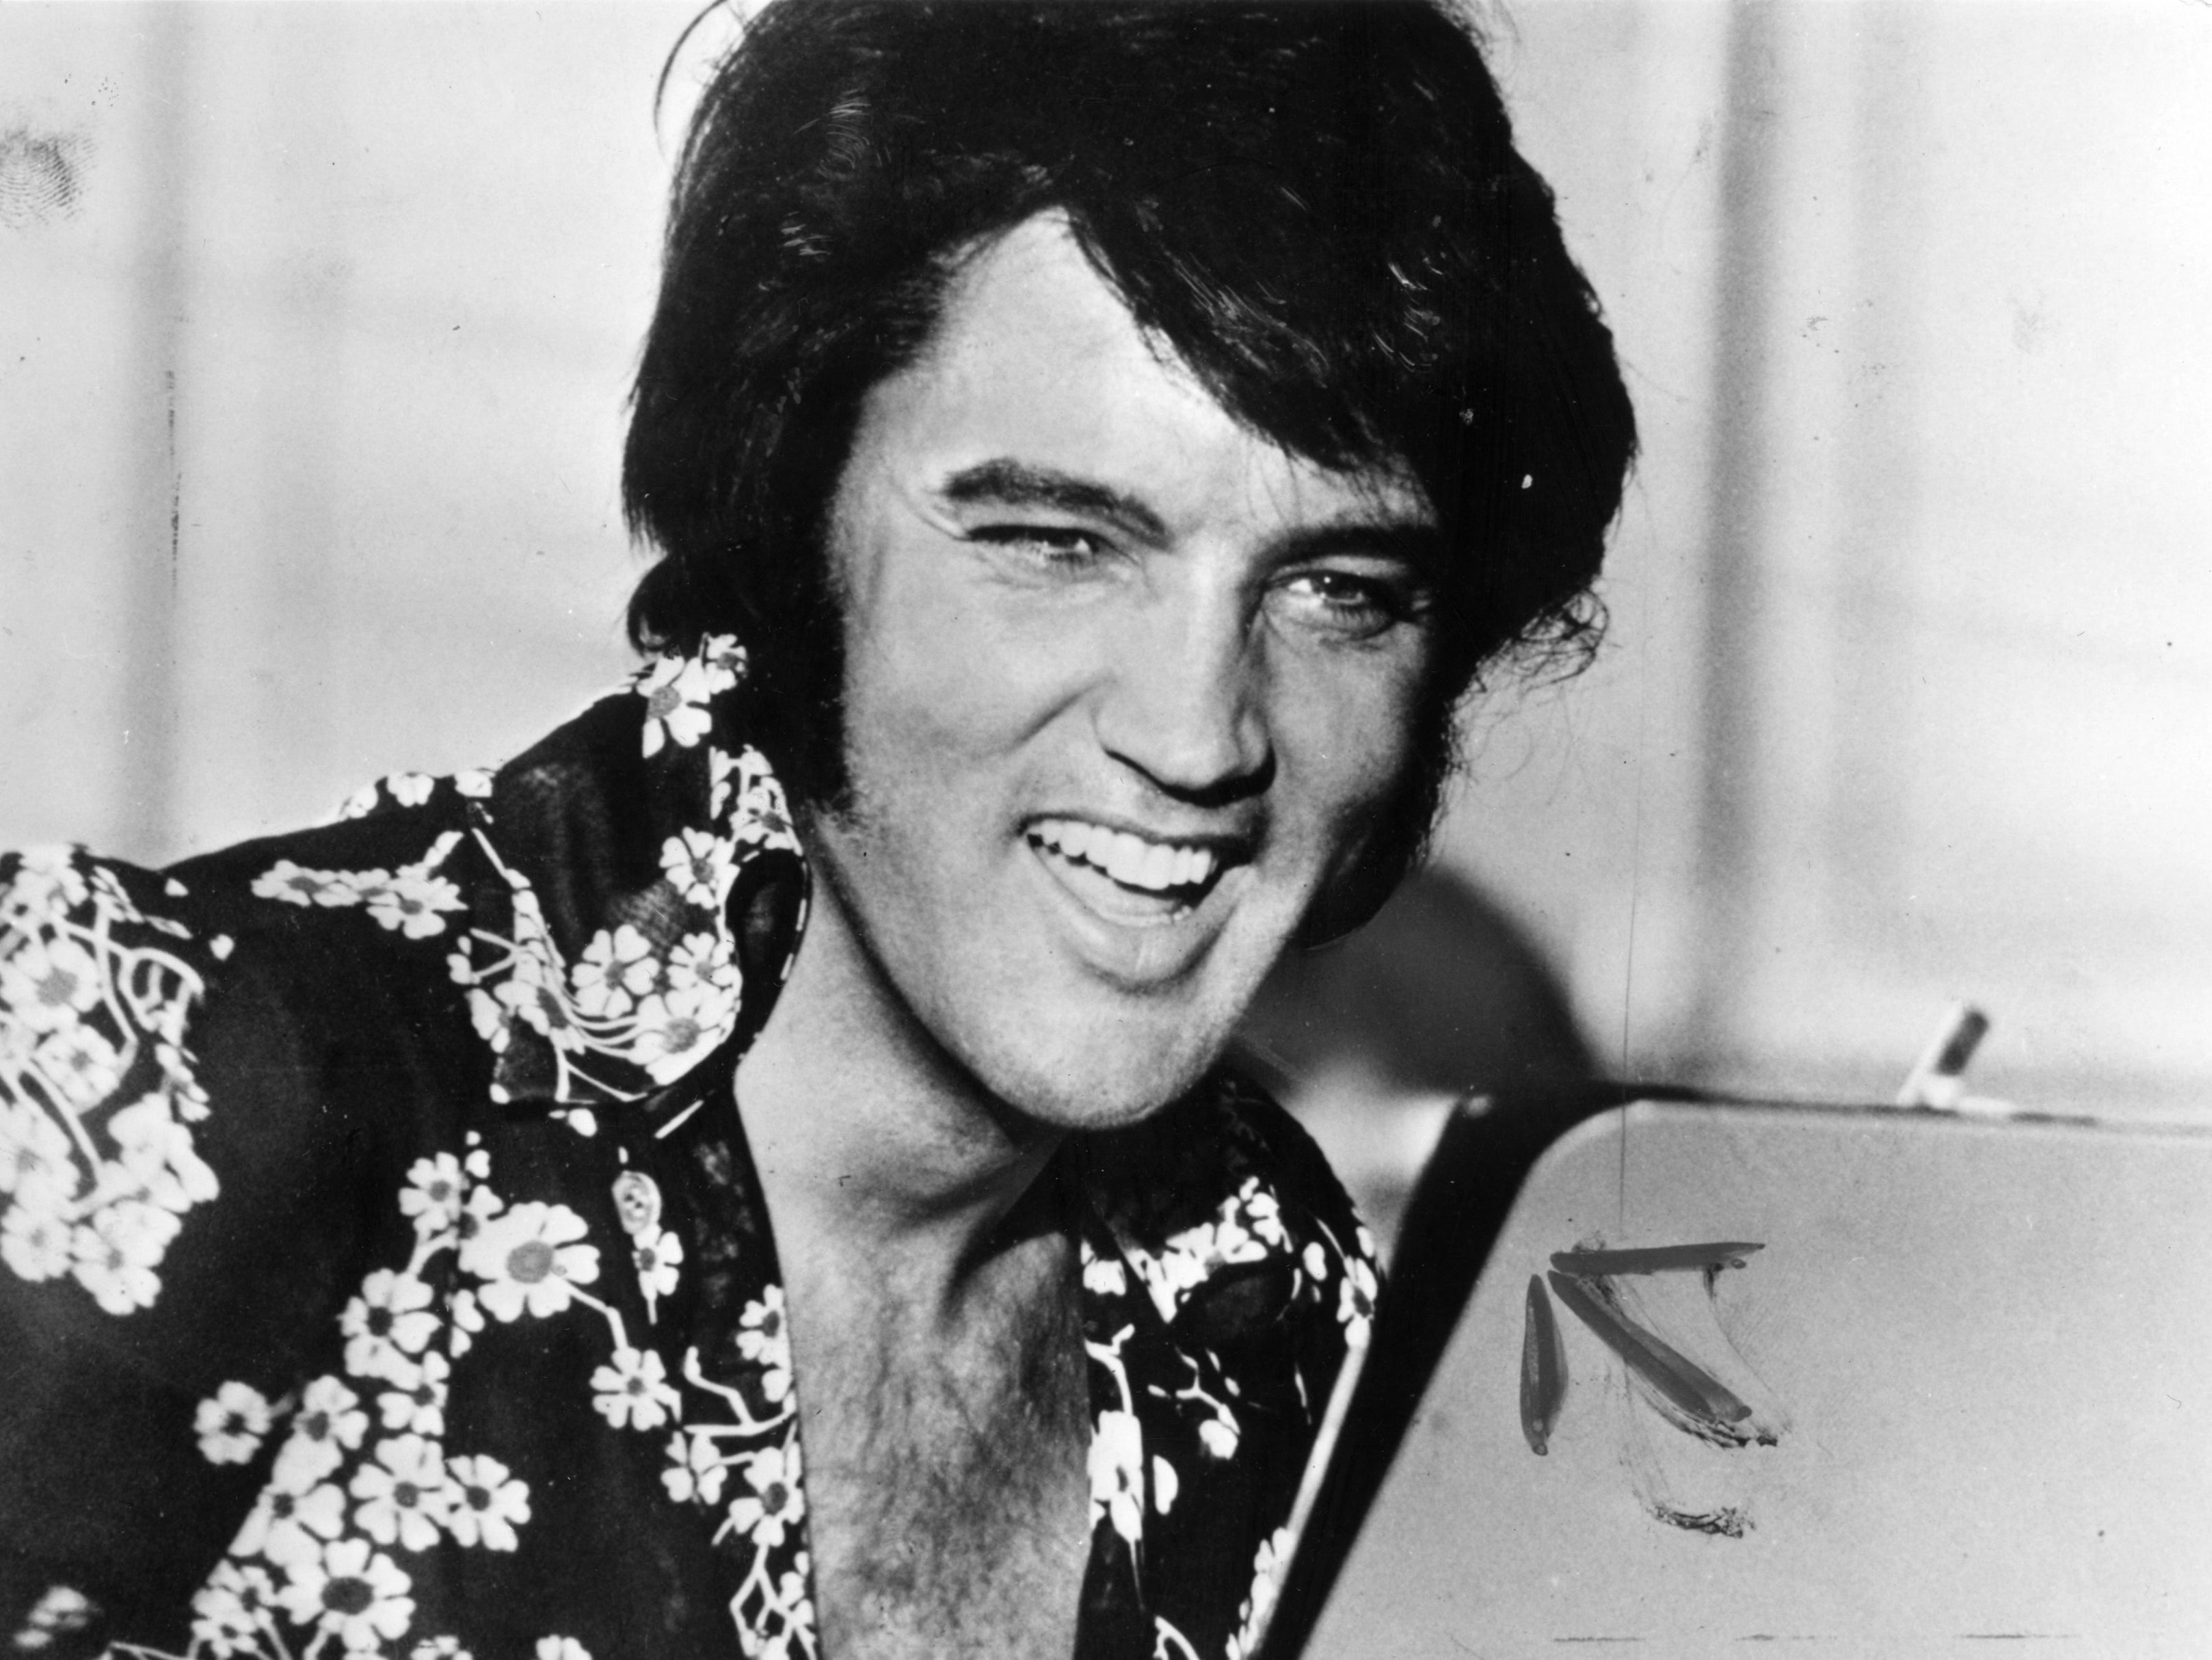 Presley in 1975: The King ‘permanently changed the face of American popular culture’